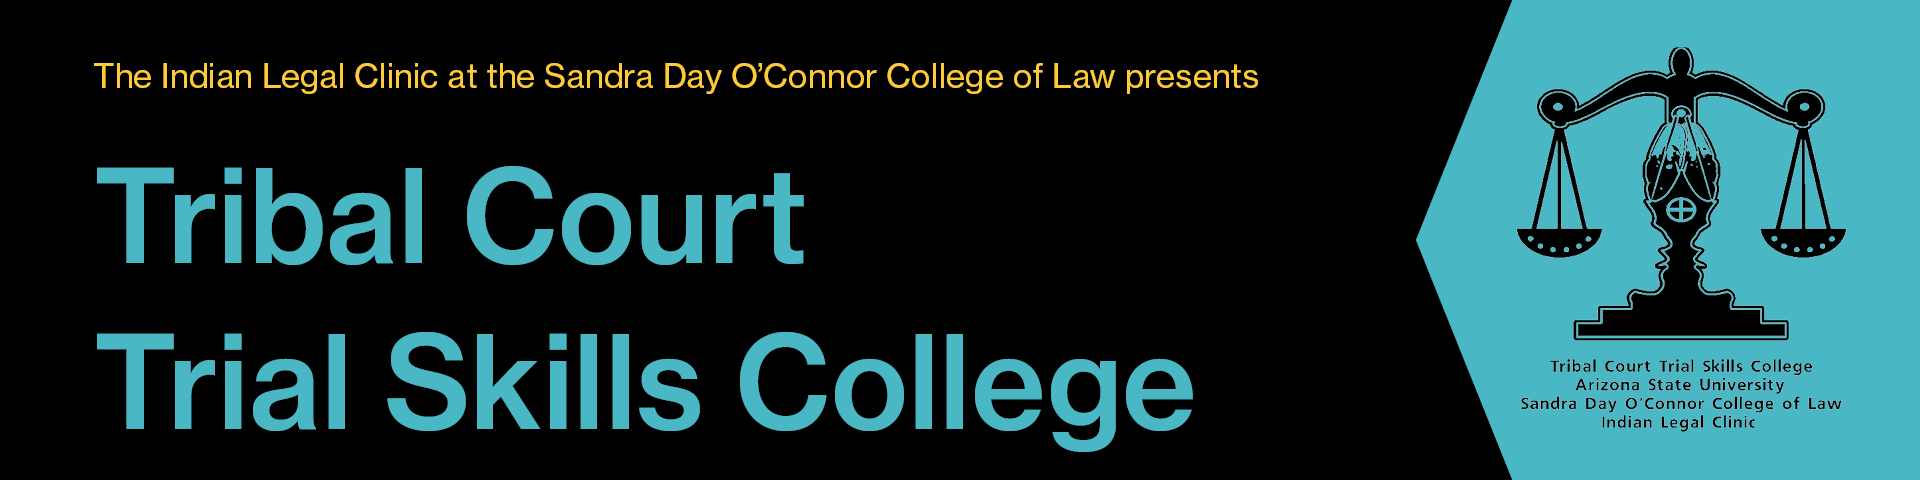 The Indian Legal Clinic at the Sandra Day O'Connor College of Law presents Tribal Court Trial Skills College